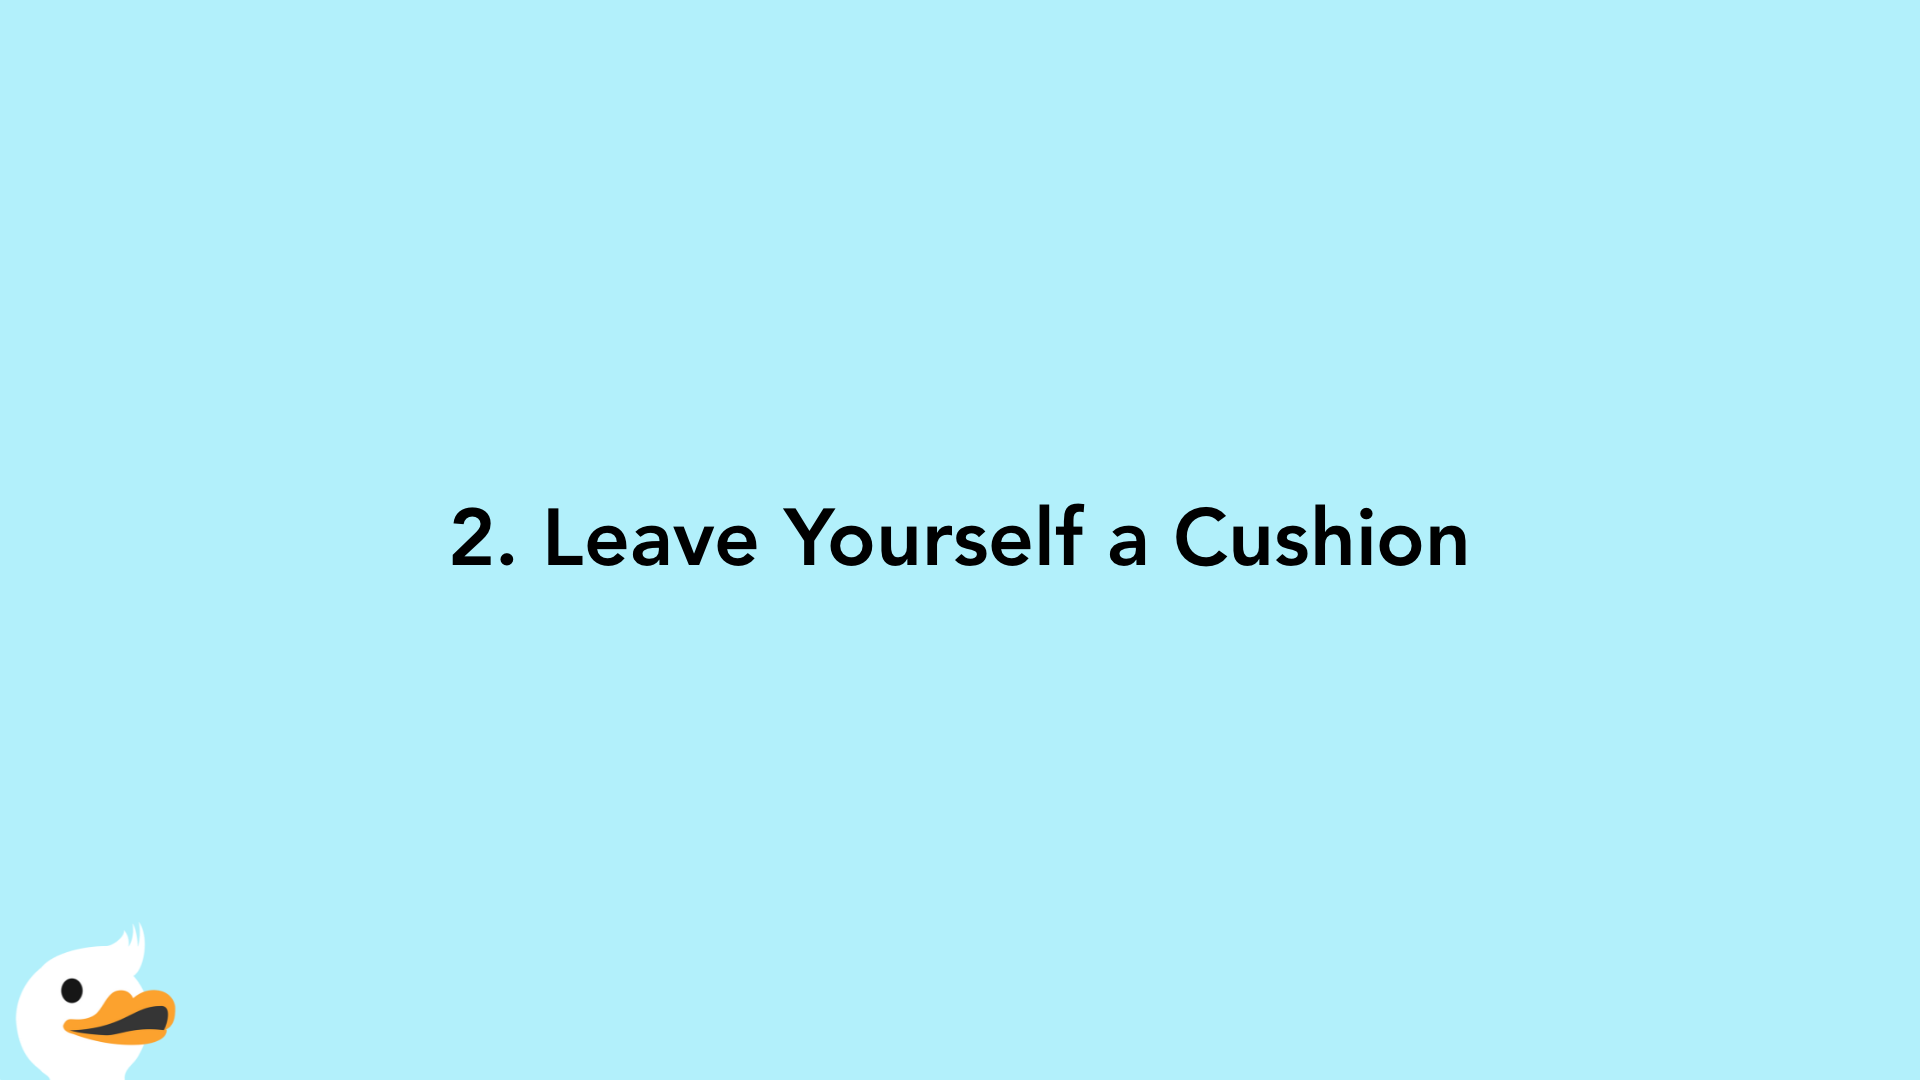 2. Leave Yourself a Cushion